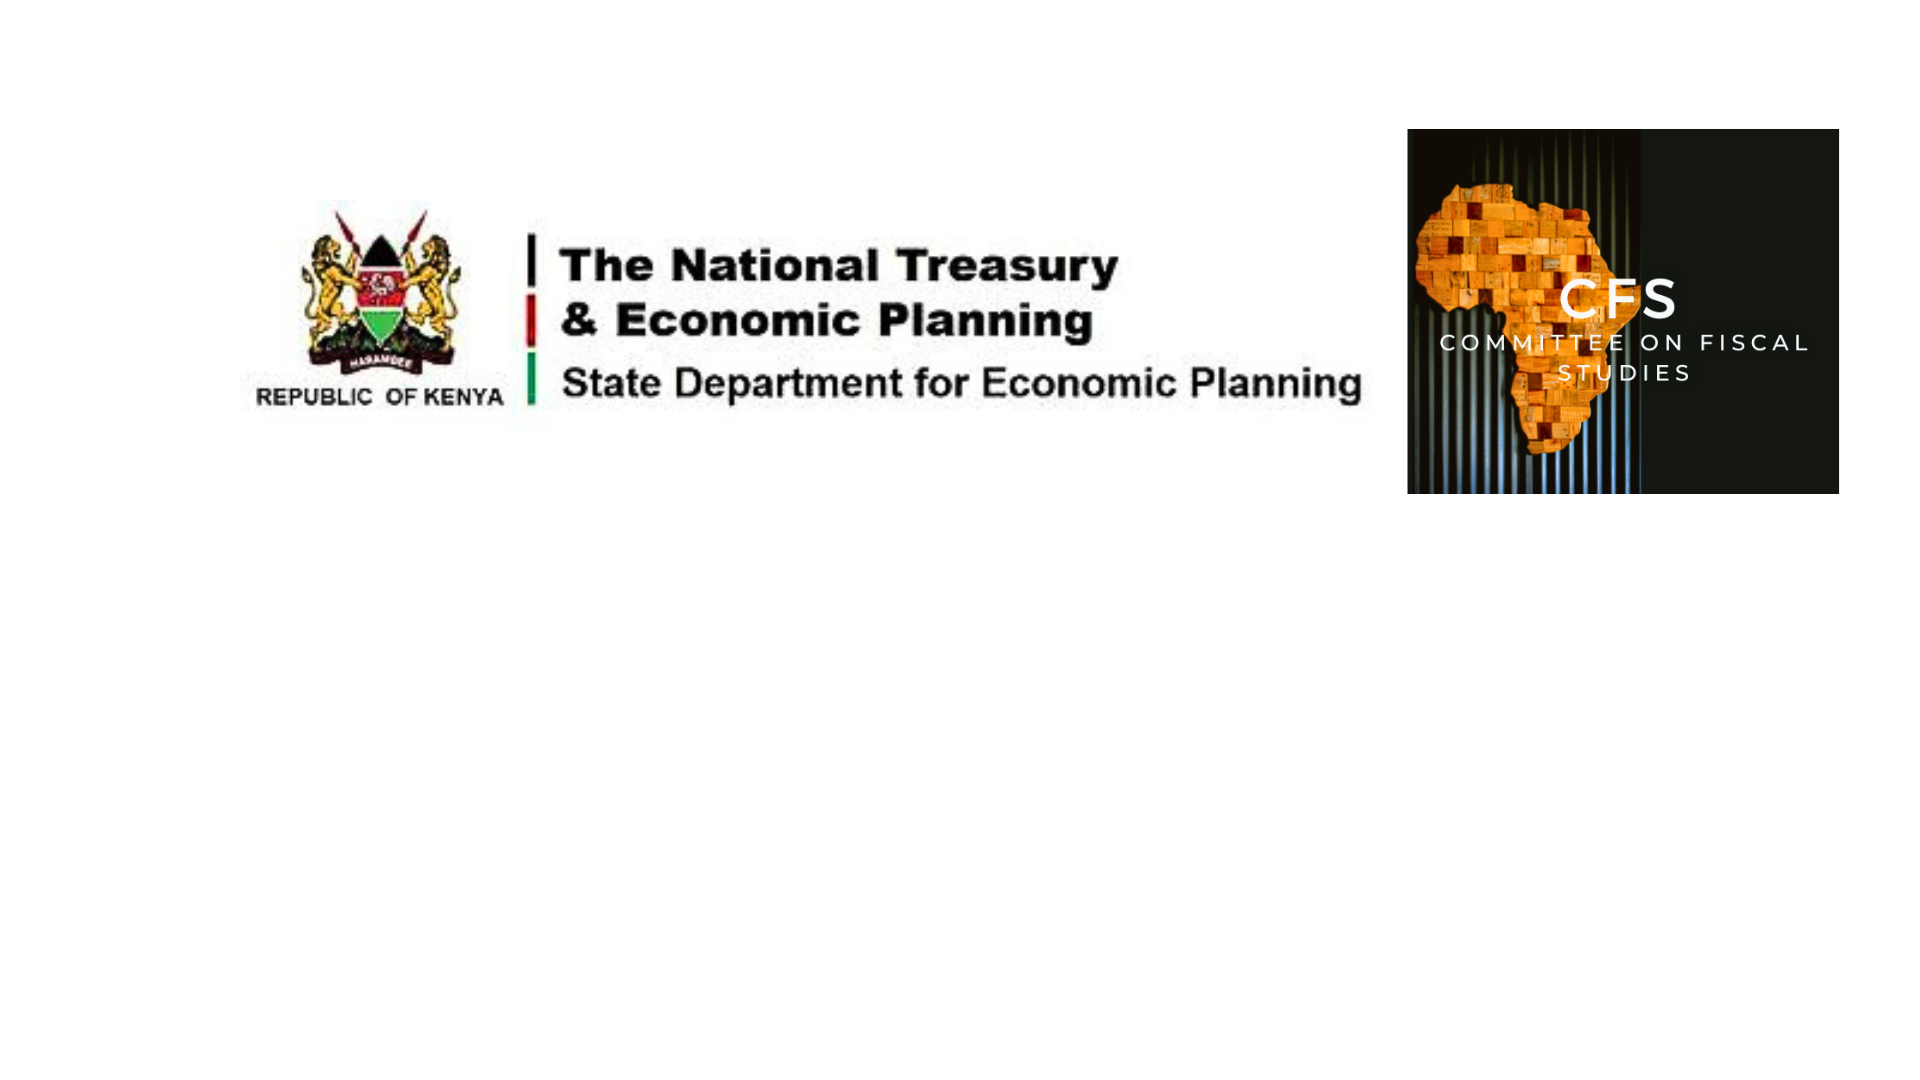 CFS engages National Treasury